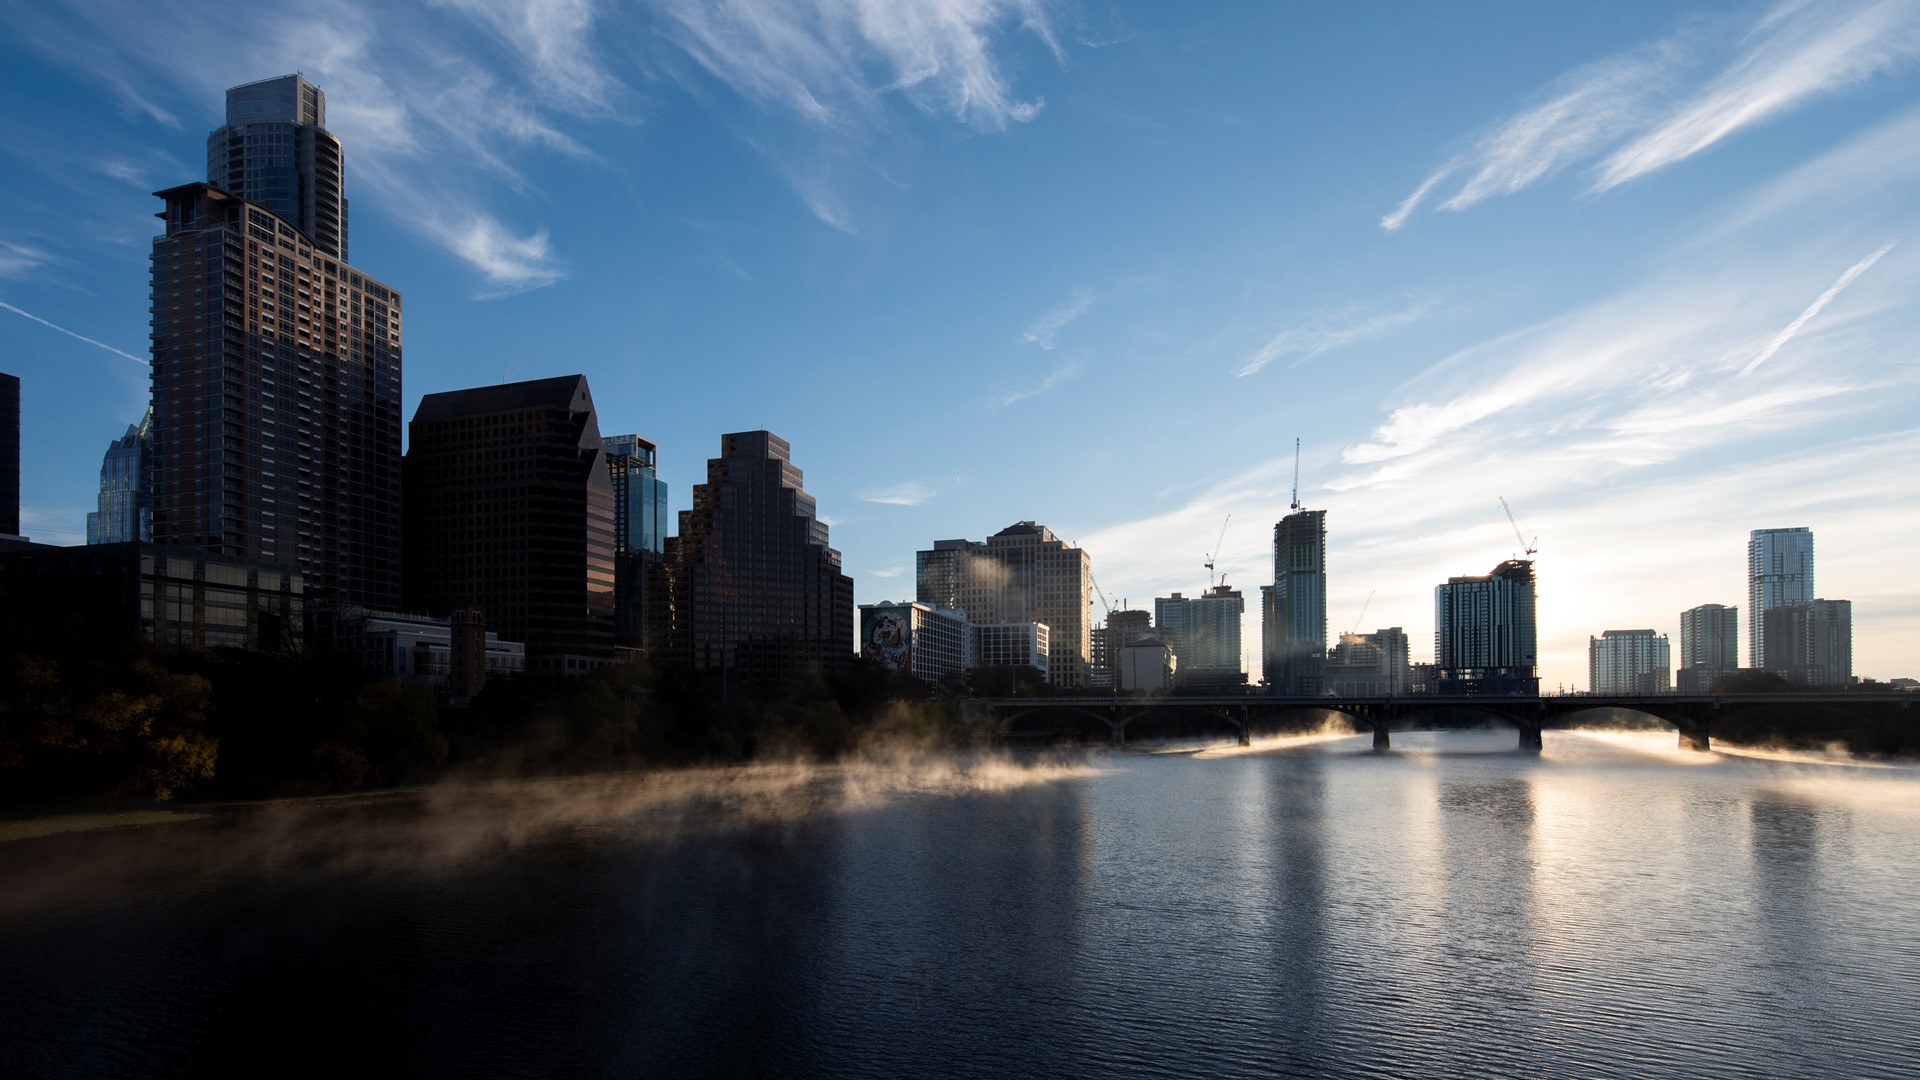 According to the Wall Street Journal, Austin has one of the hottest job markets in the country.